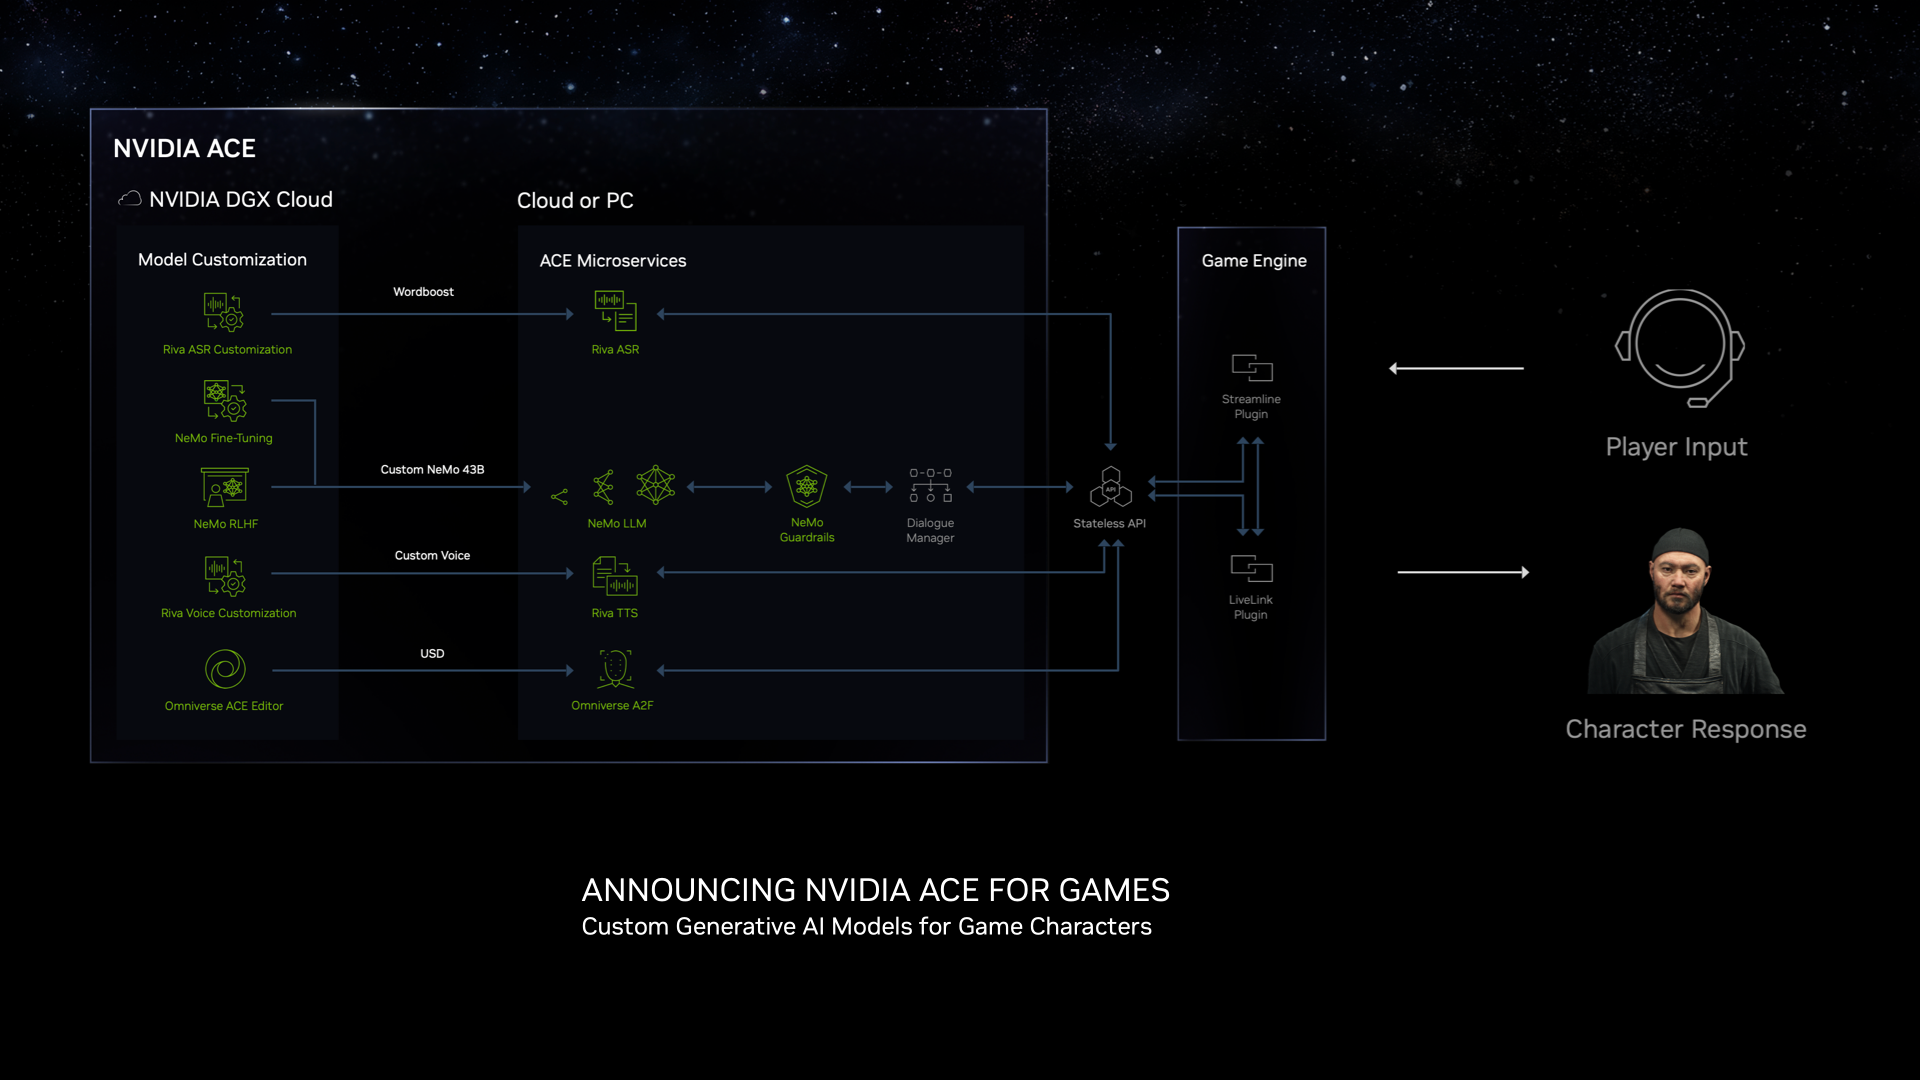 nvidia-ace-for-games-modules-graphic (1).png